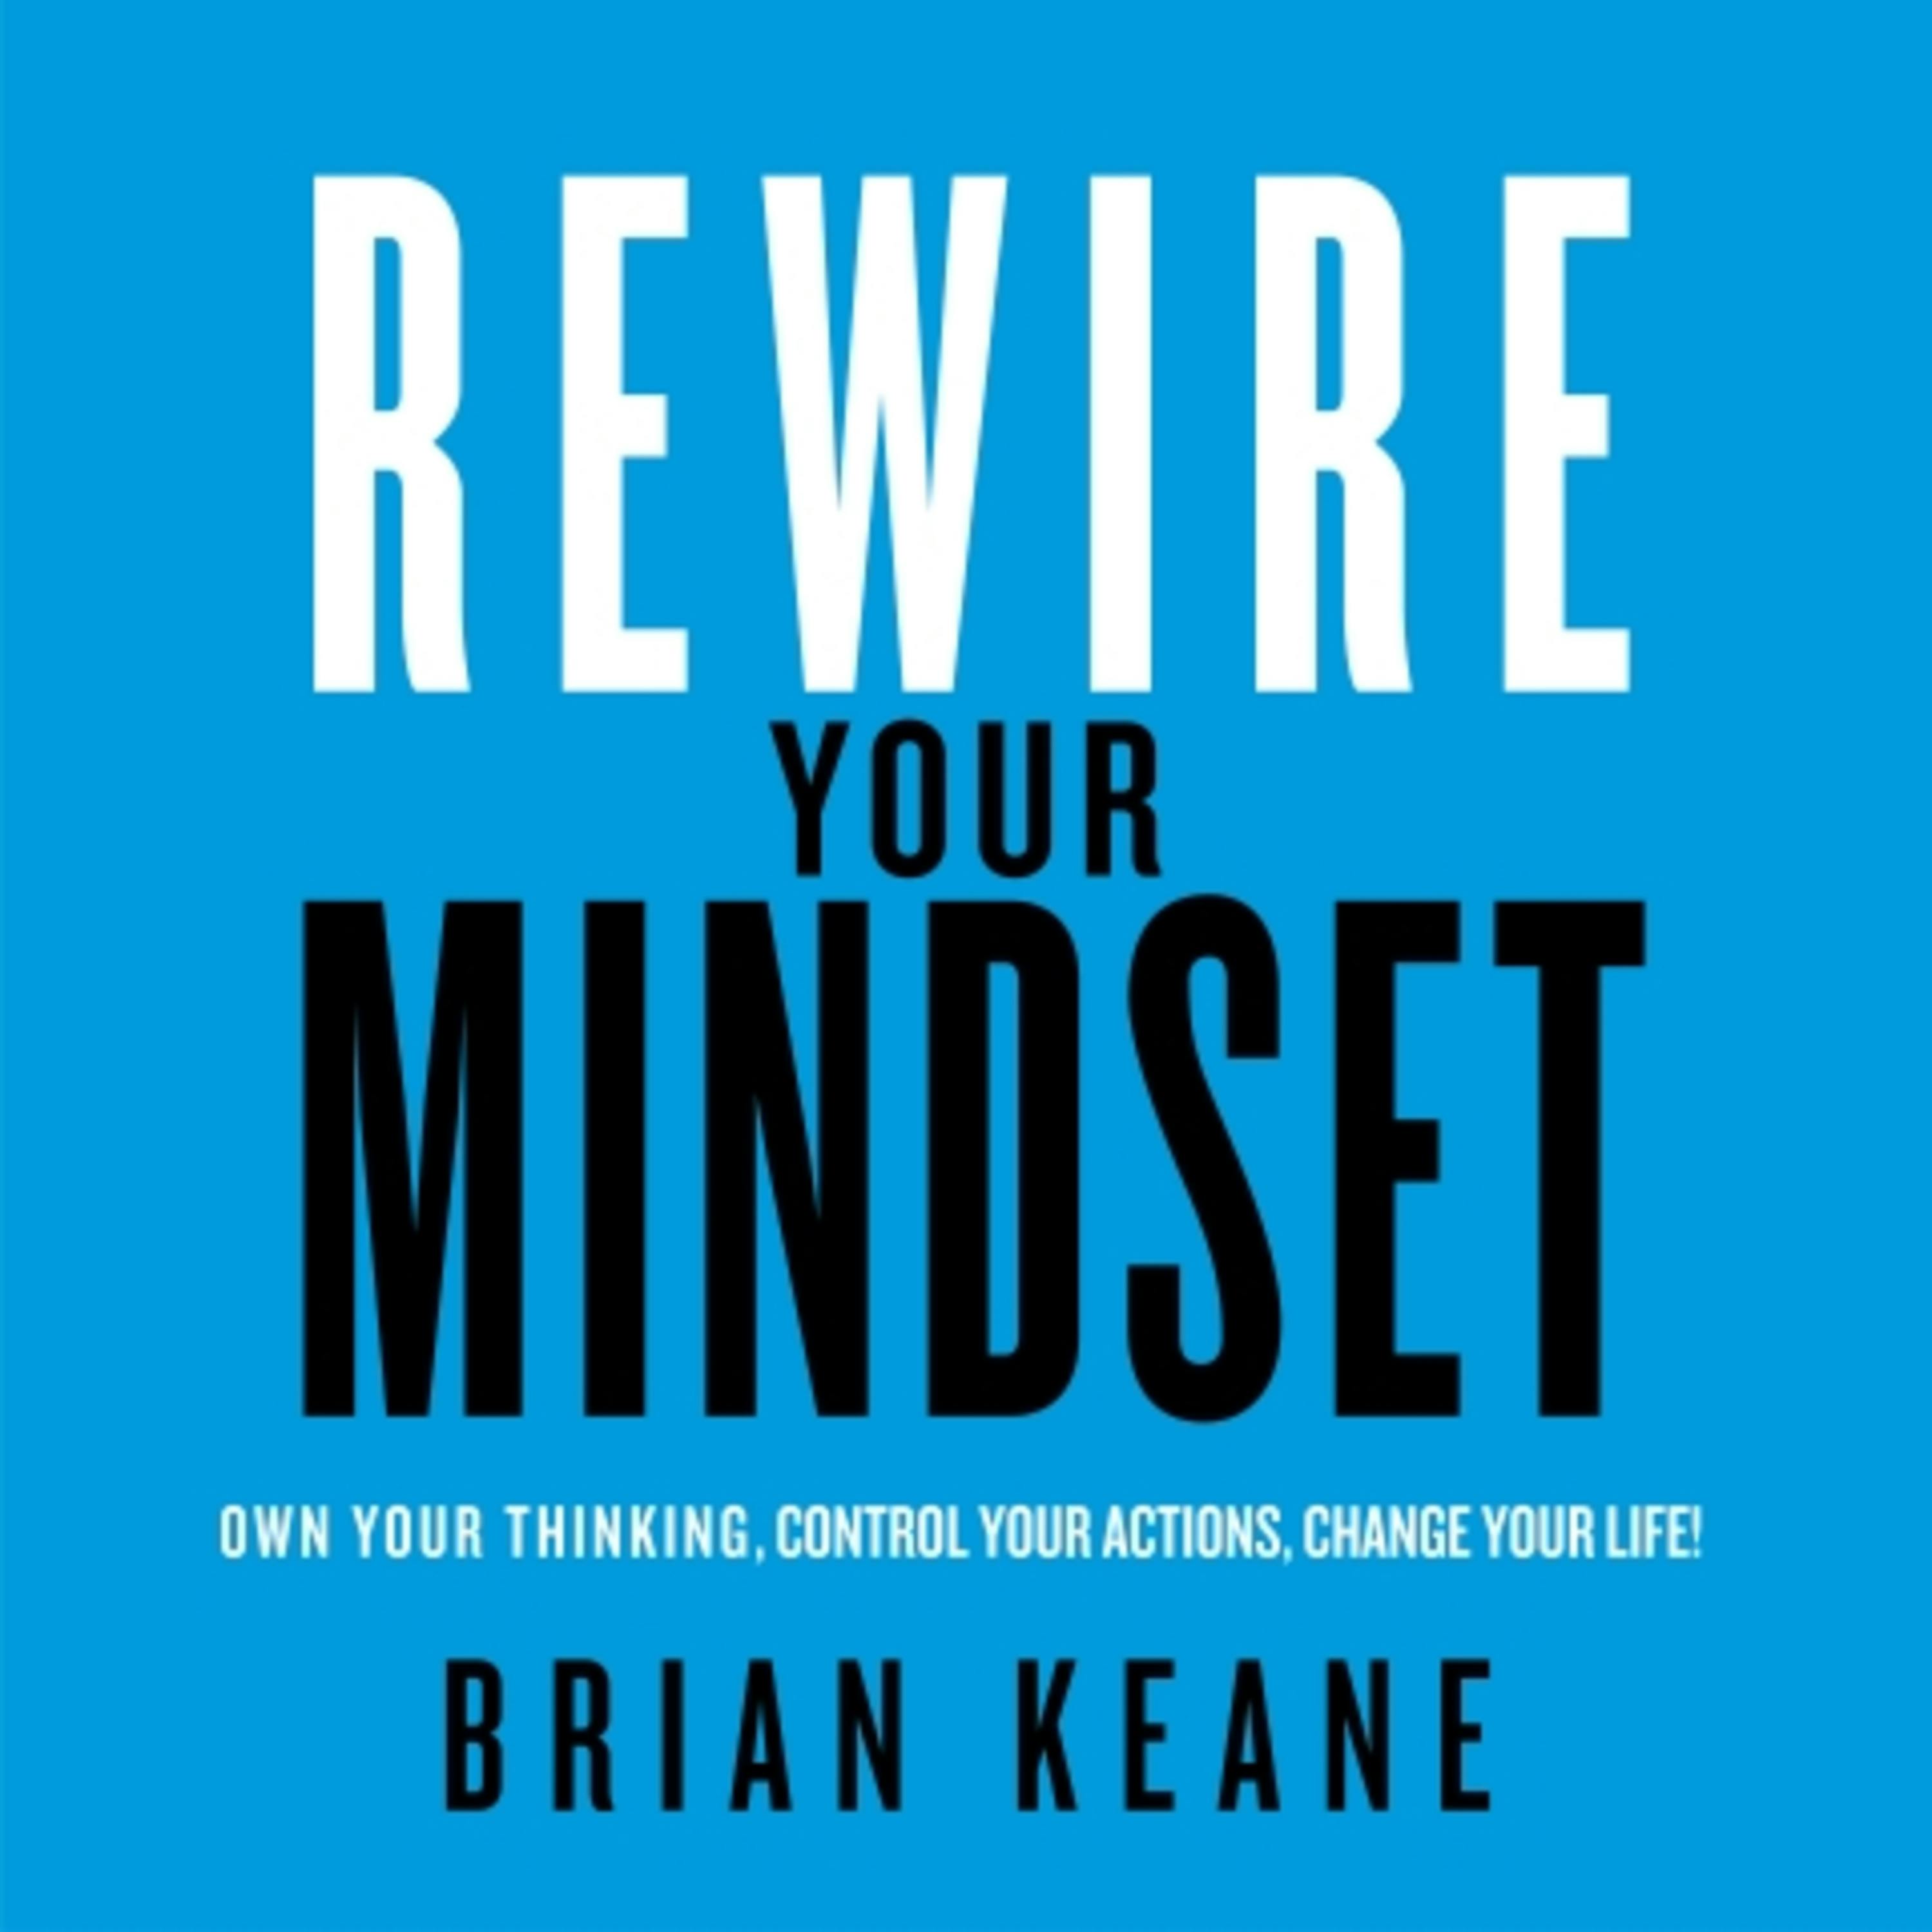 Rewire Your Mindset: Own Your Thinking, Control Your Actions, Change Your Life! - Brian Keane